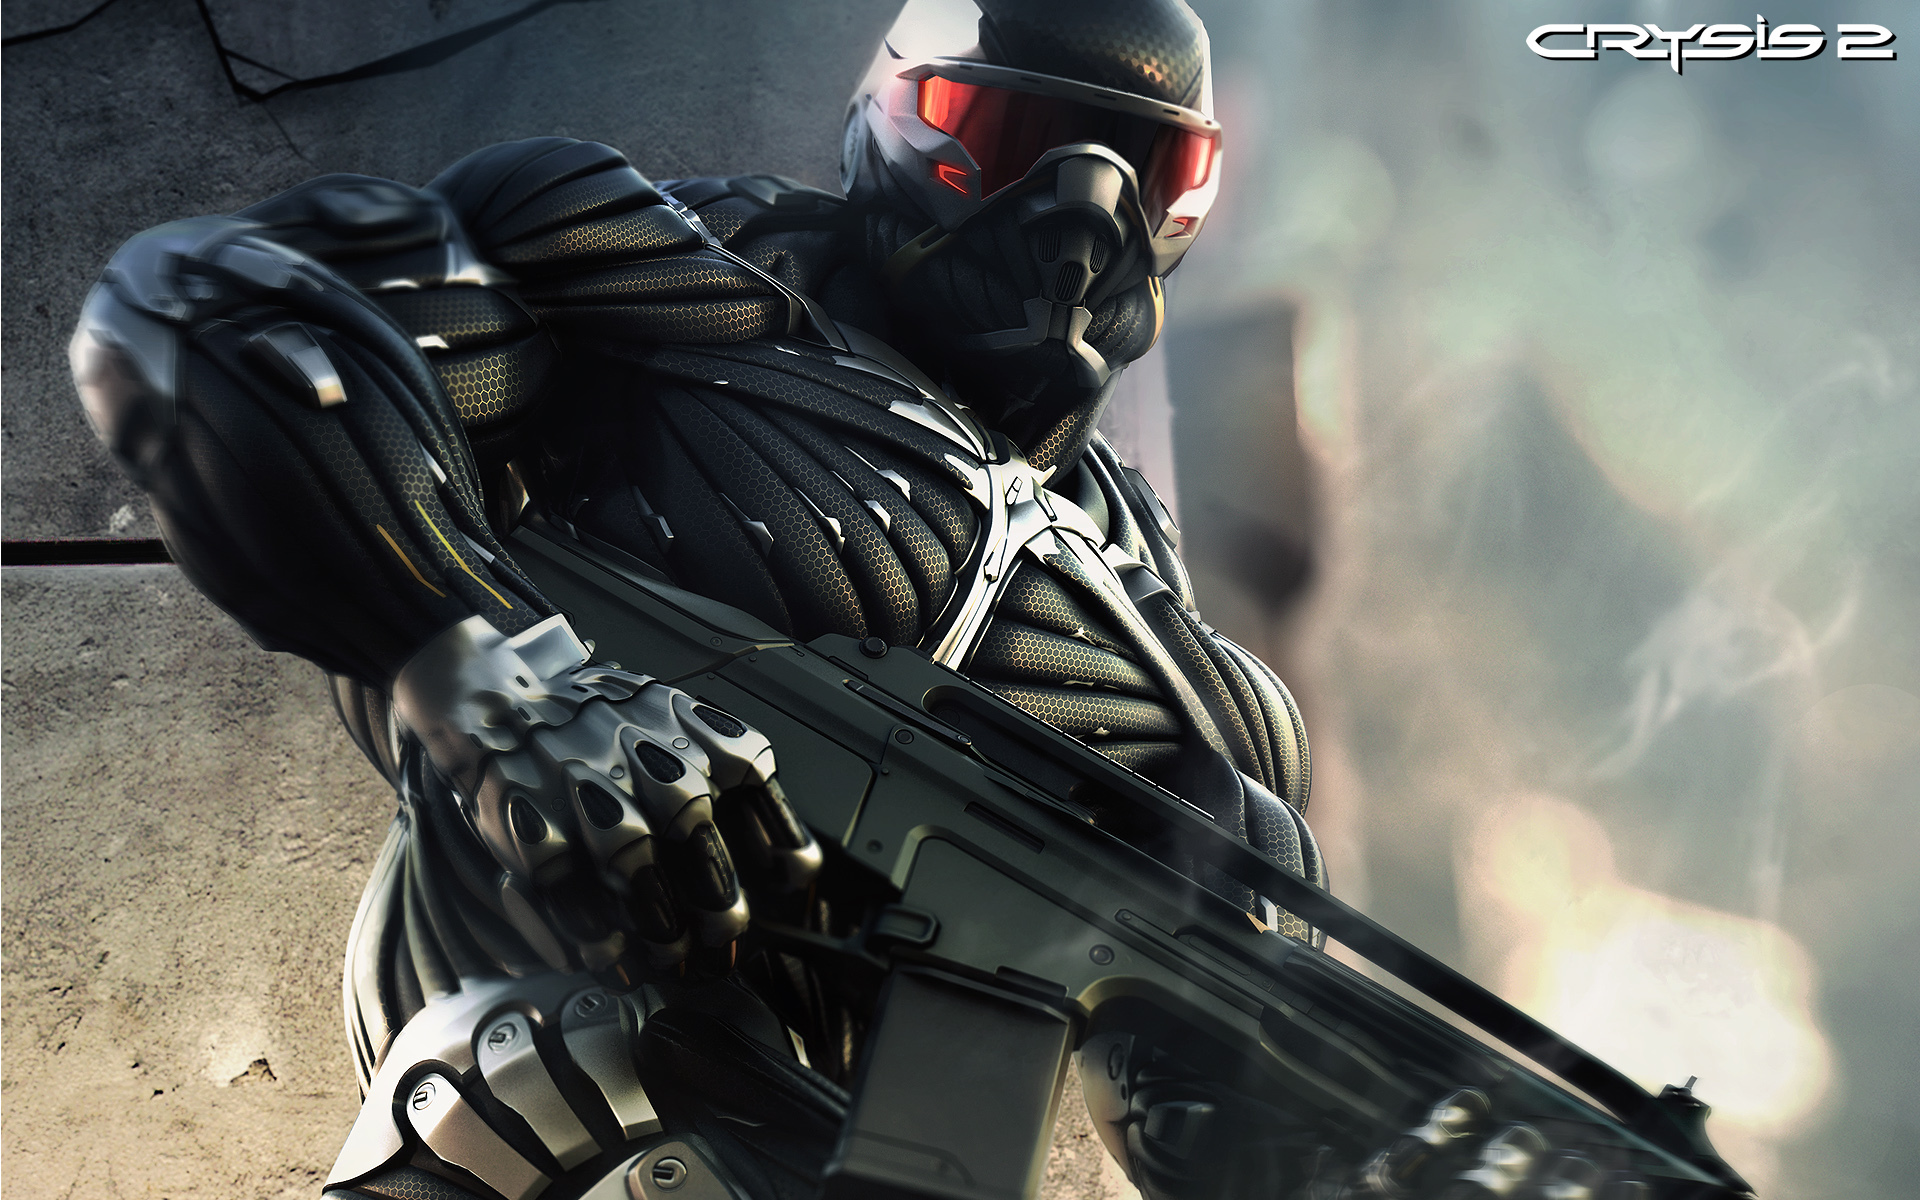 Popular Crysis Image for Phone